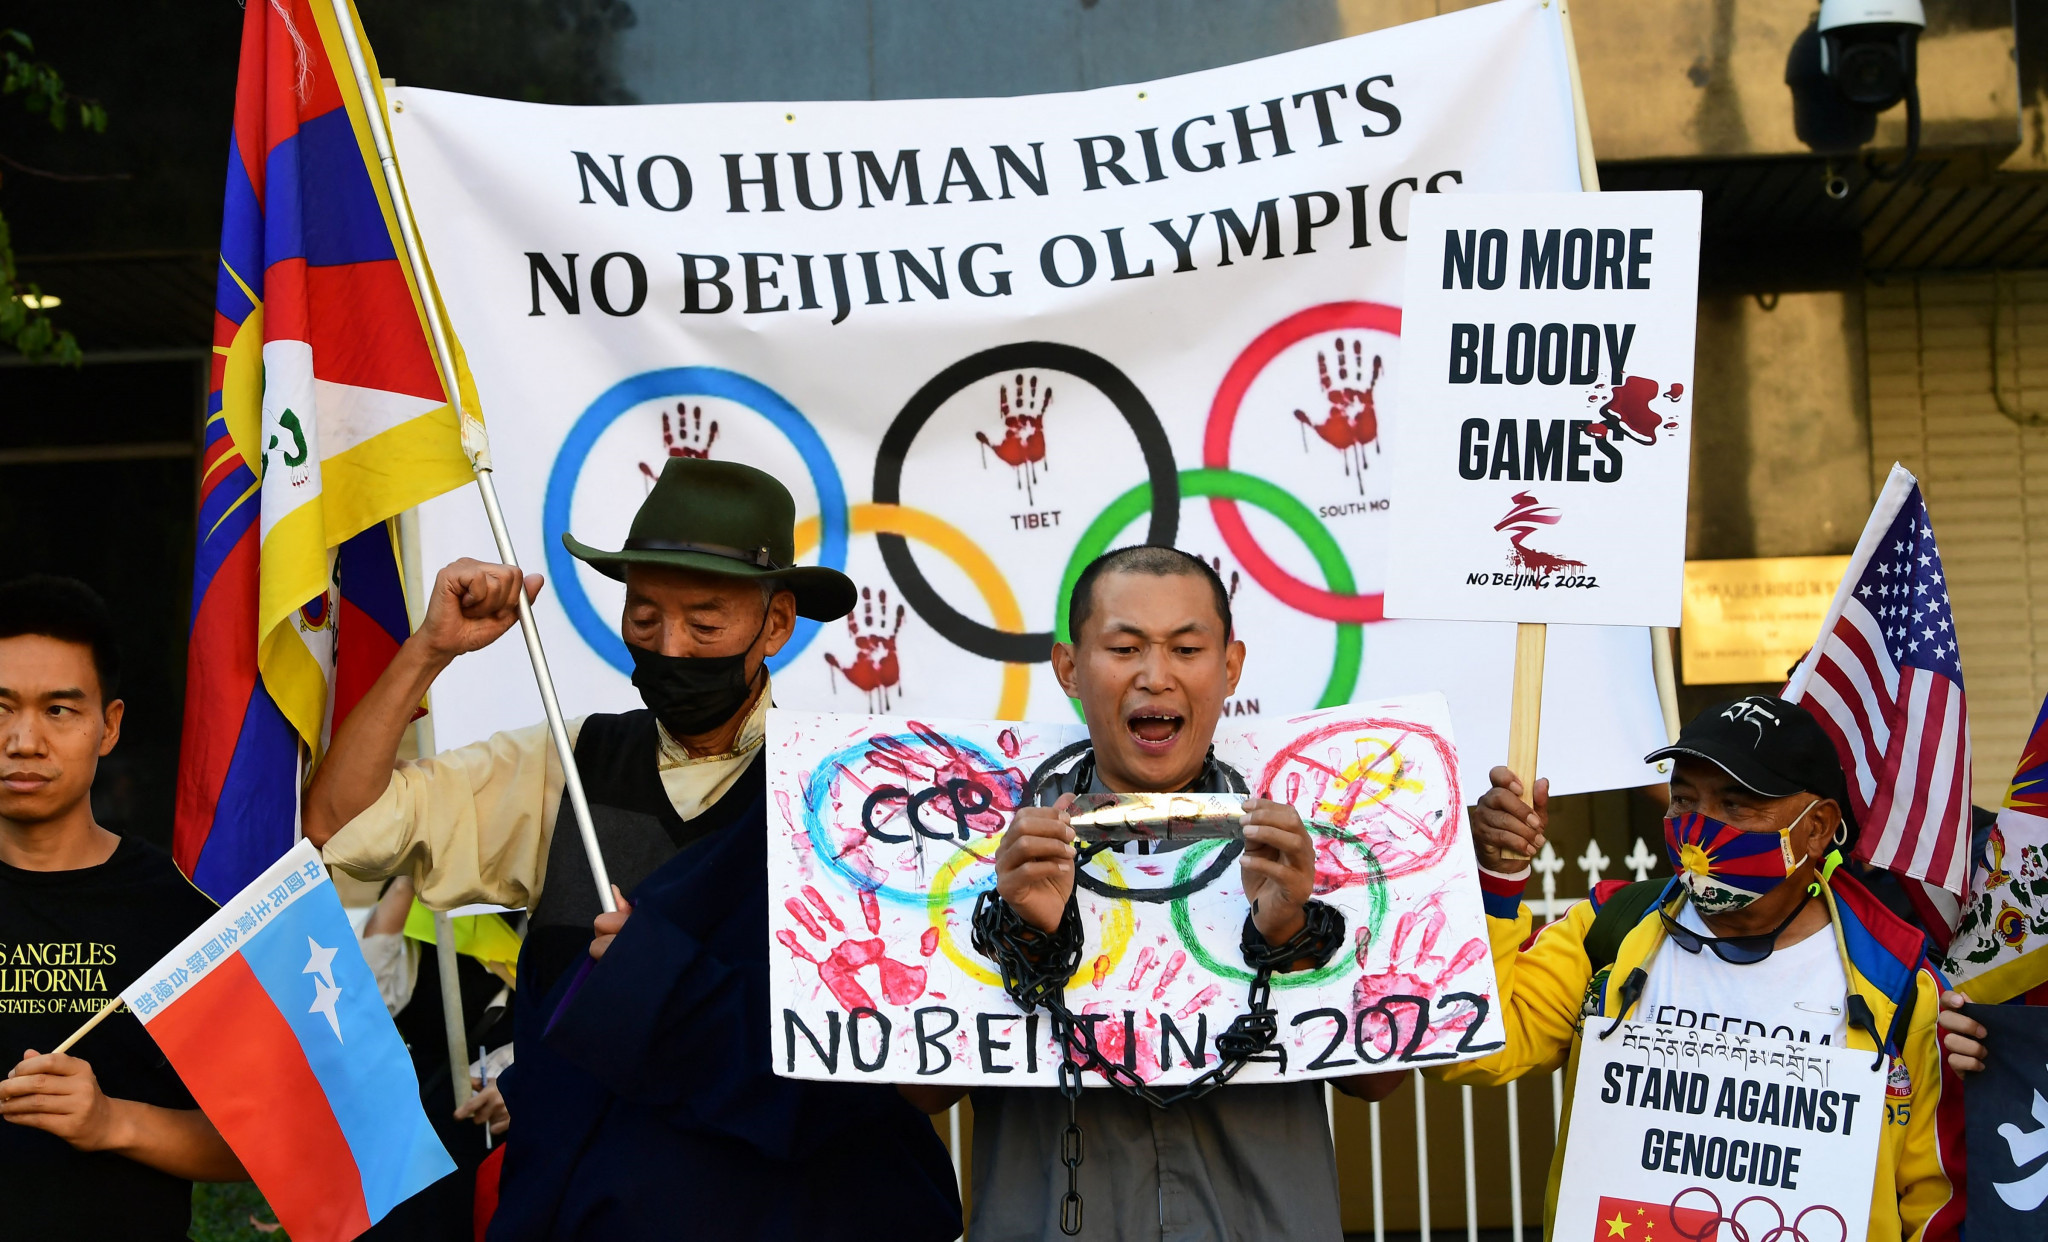 Calls are growing for countries to boycott Beijing 2022 in response to China's treatment of its Uyghur Muslim minority ©Getty Images